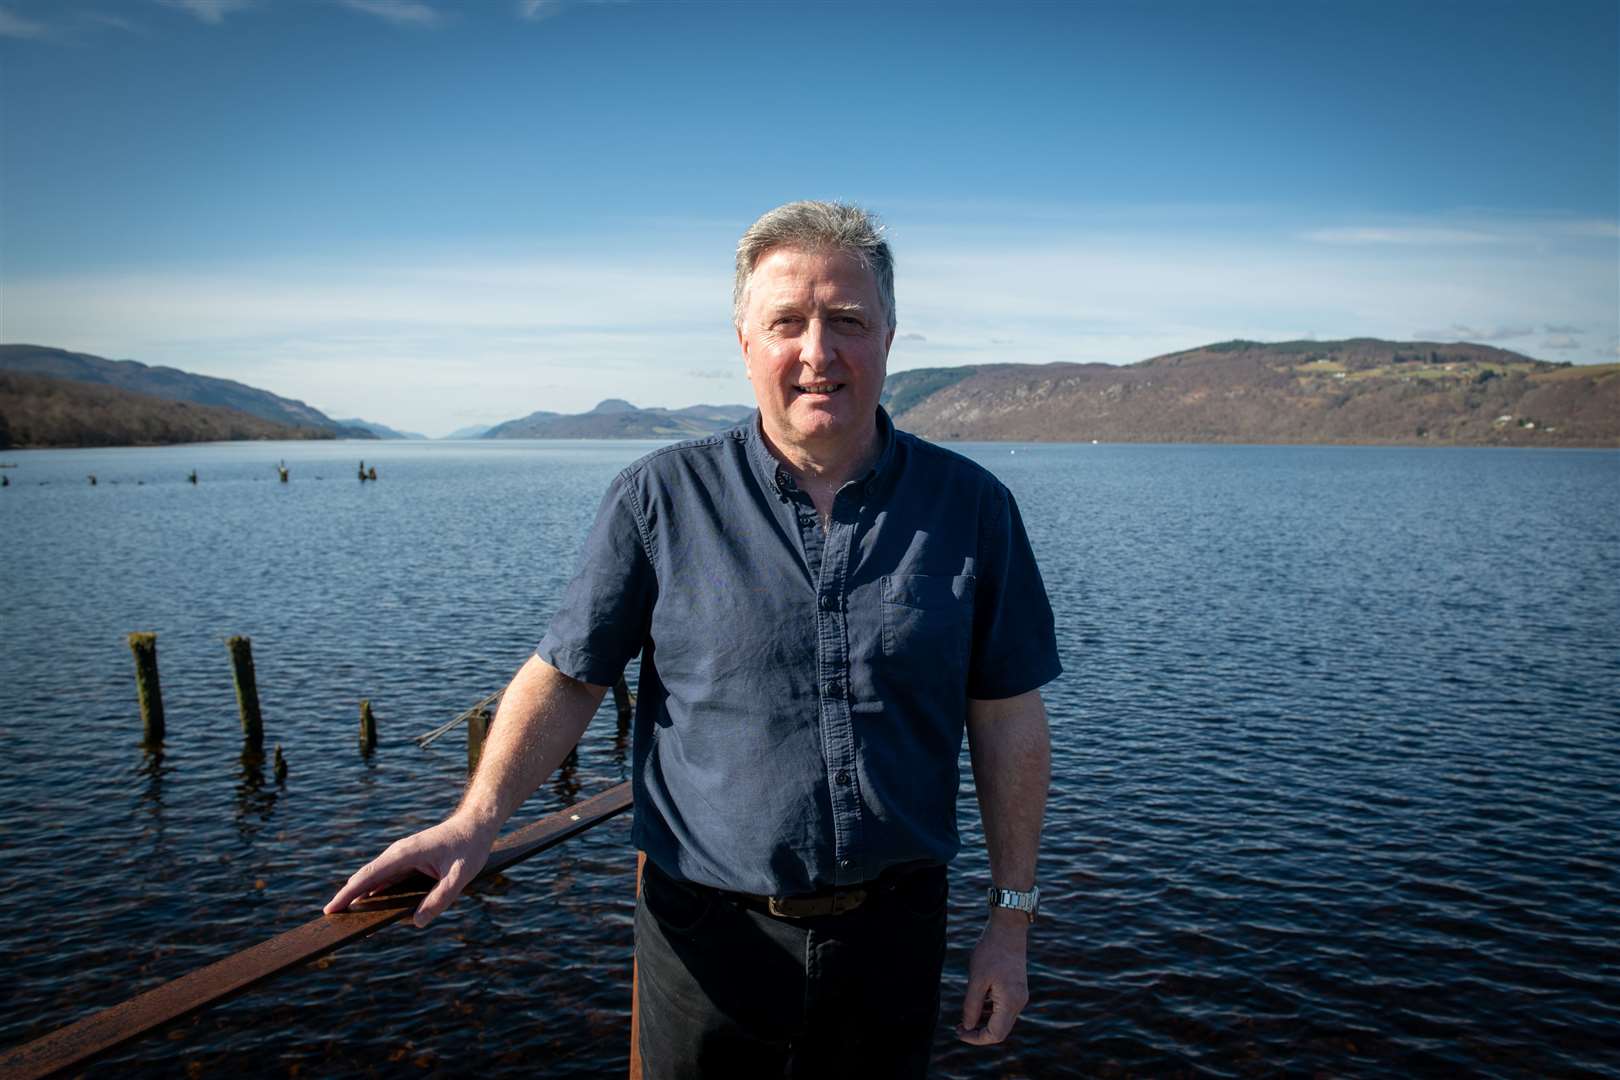 Gary Campbell has been keeper of the Official Loch Ness Monster Register since 1996.